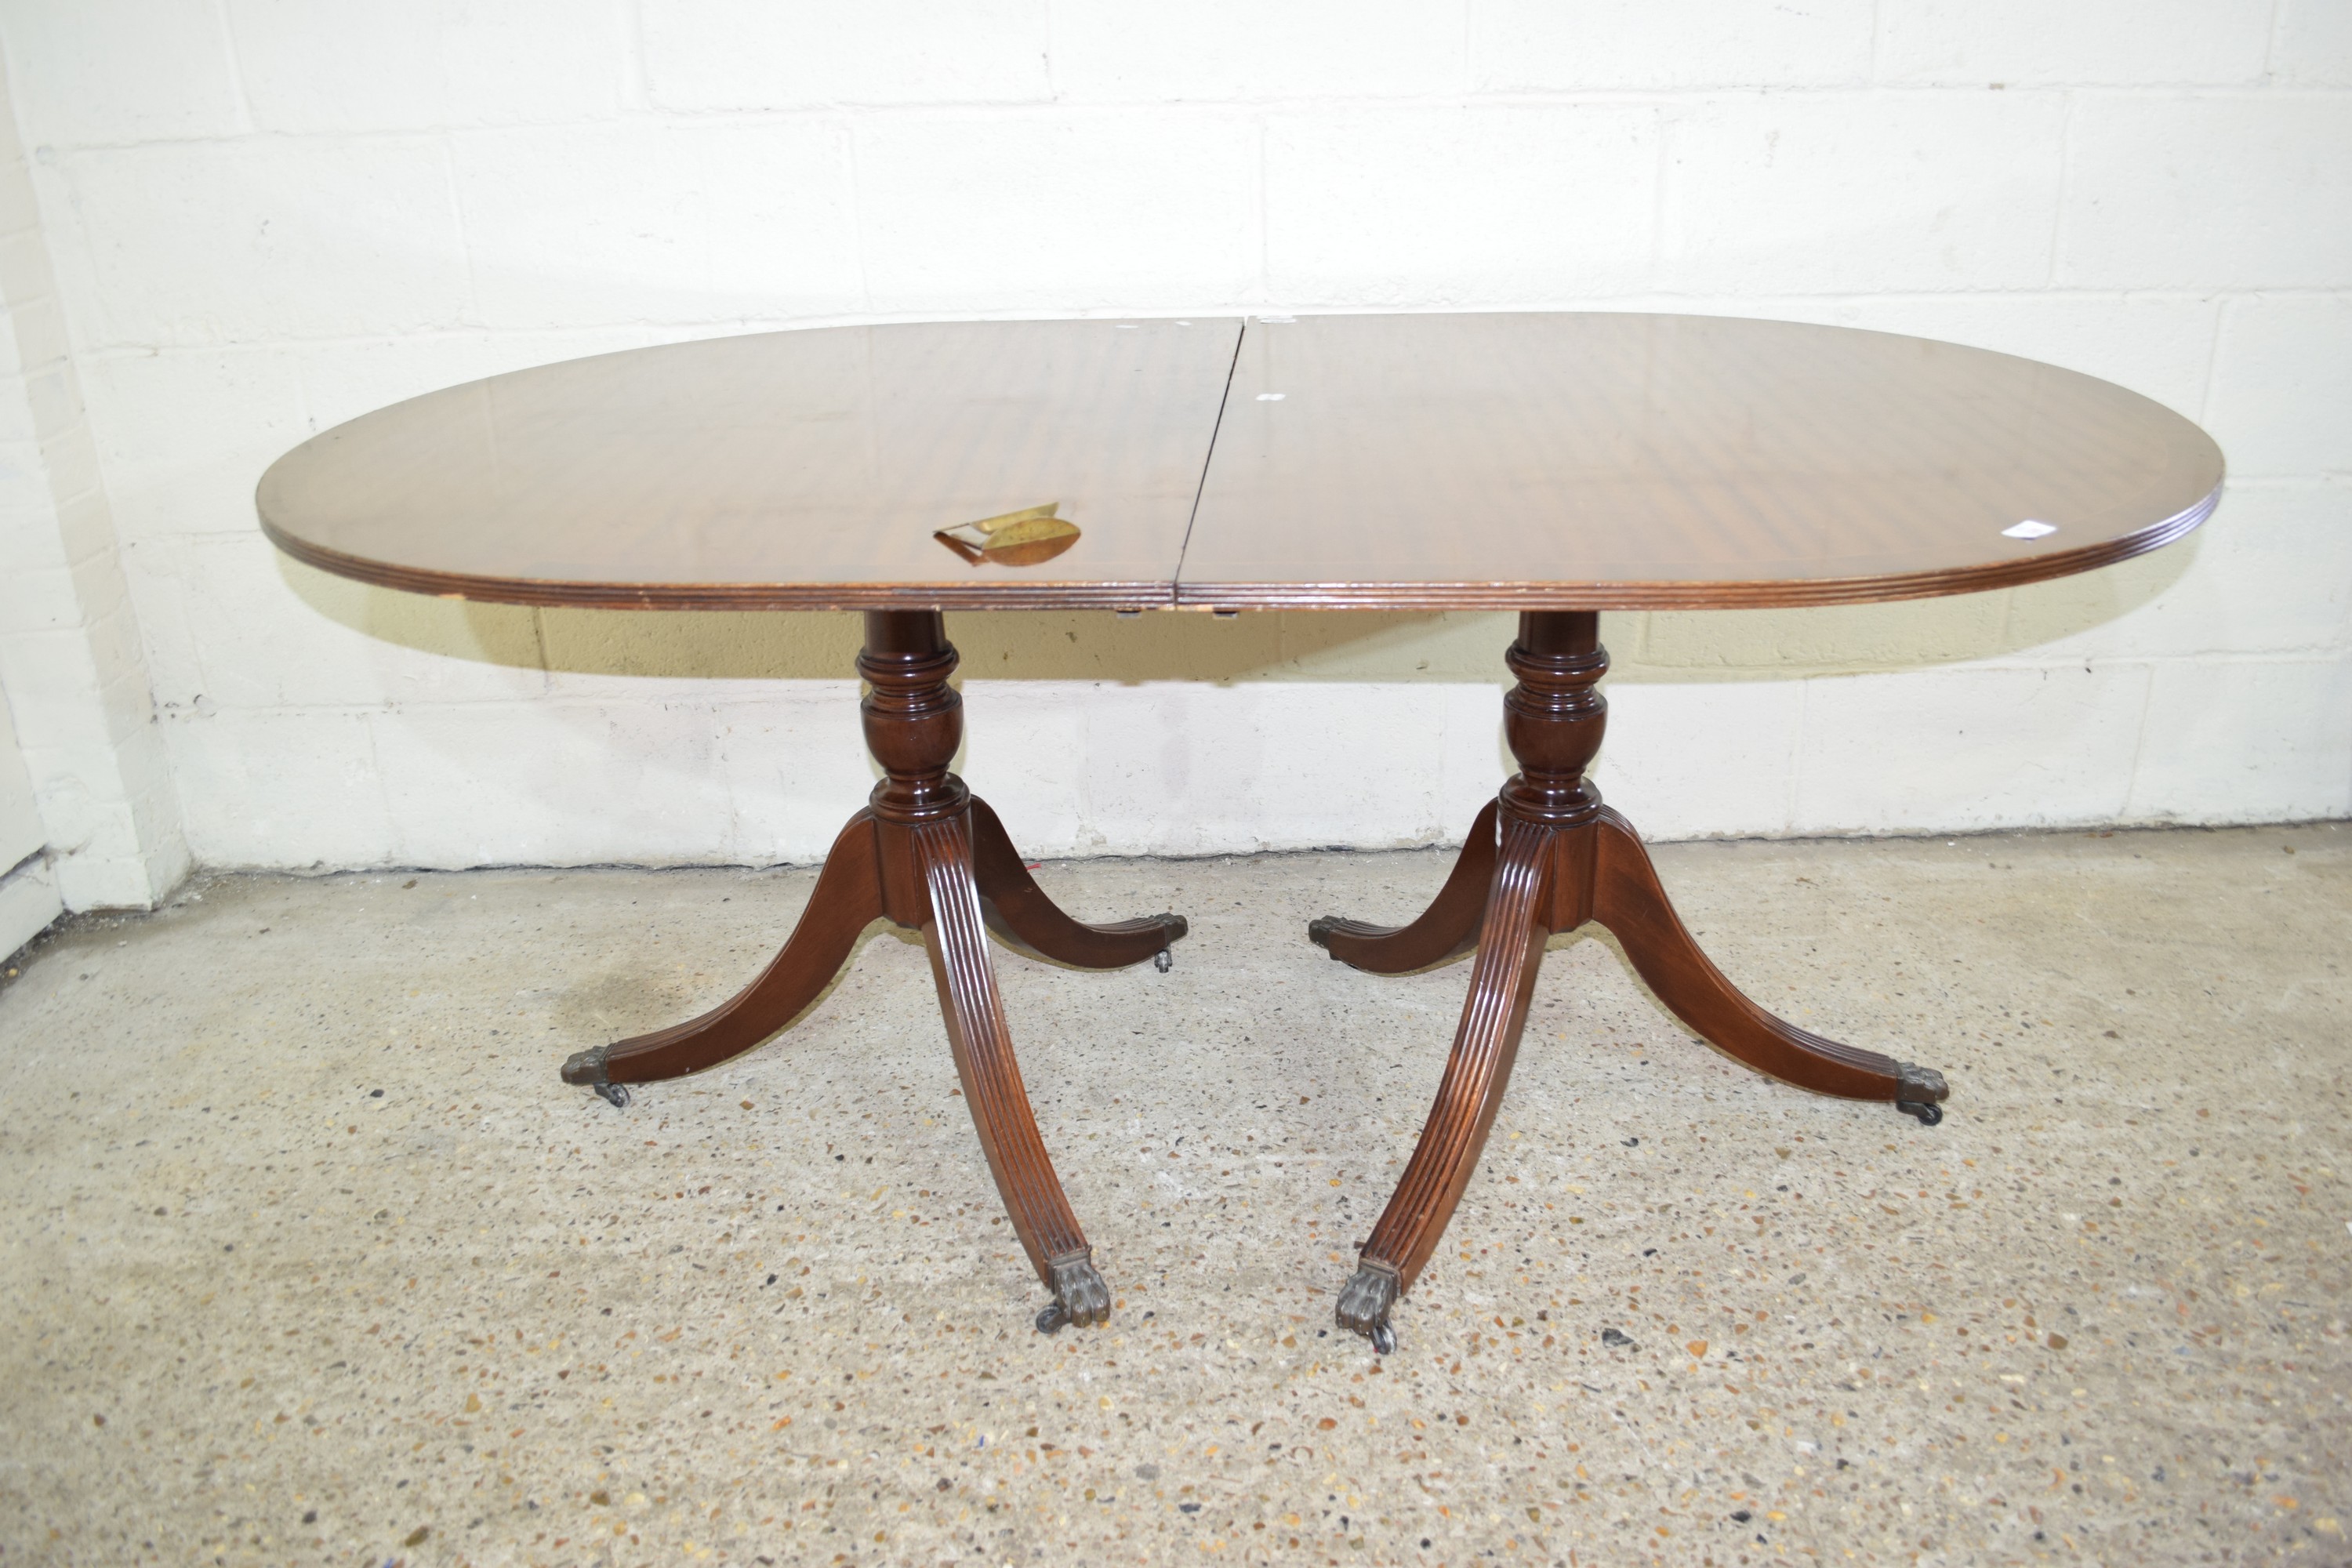 MAHOGANY REPRO D-END REGENCY-STYLE DINING TABLE - Image 2 of 2